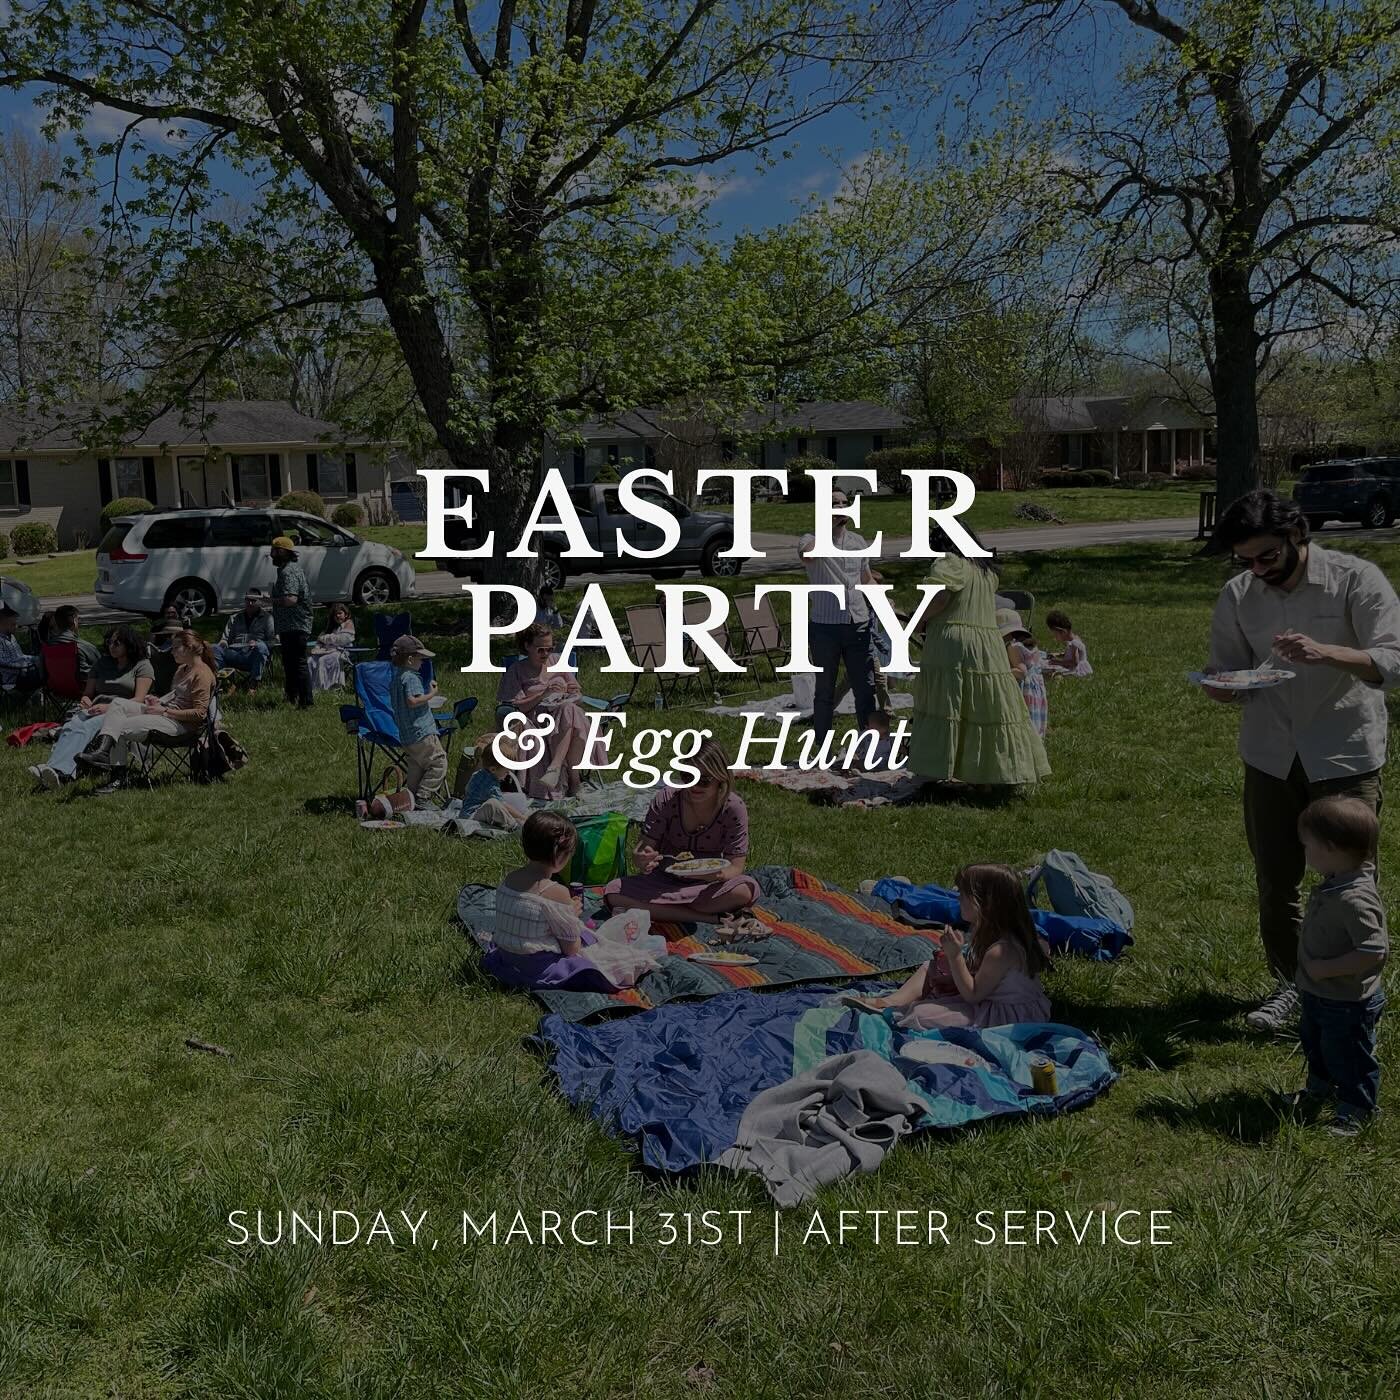 Join us for our Easter Party and Egg Hunt immediately after the Sunday morning service! The party will be held at Harpeth Knoll Park, just a short walking distance from the church. This will be potluck style, so bring a dish to share, a side, salad, 